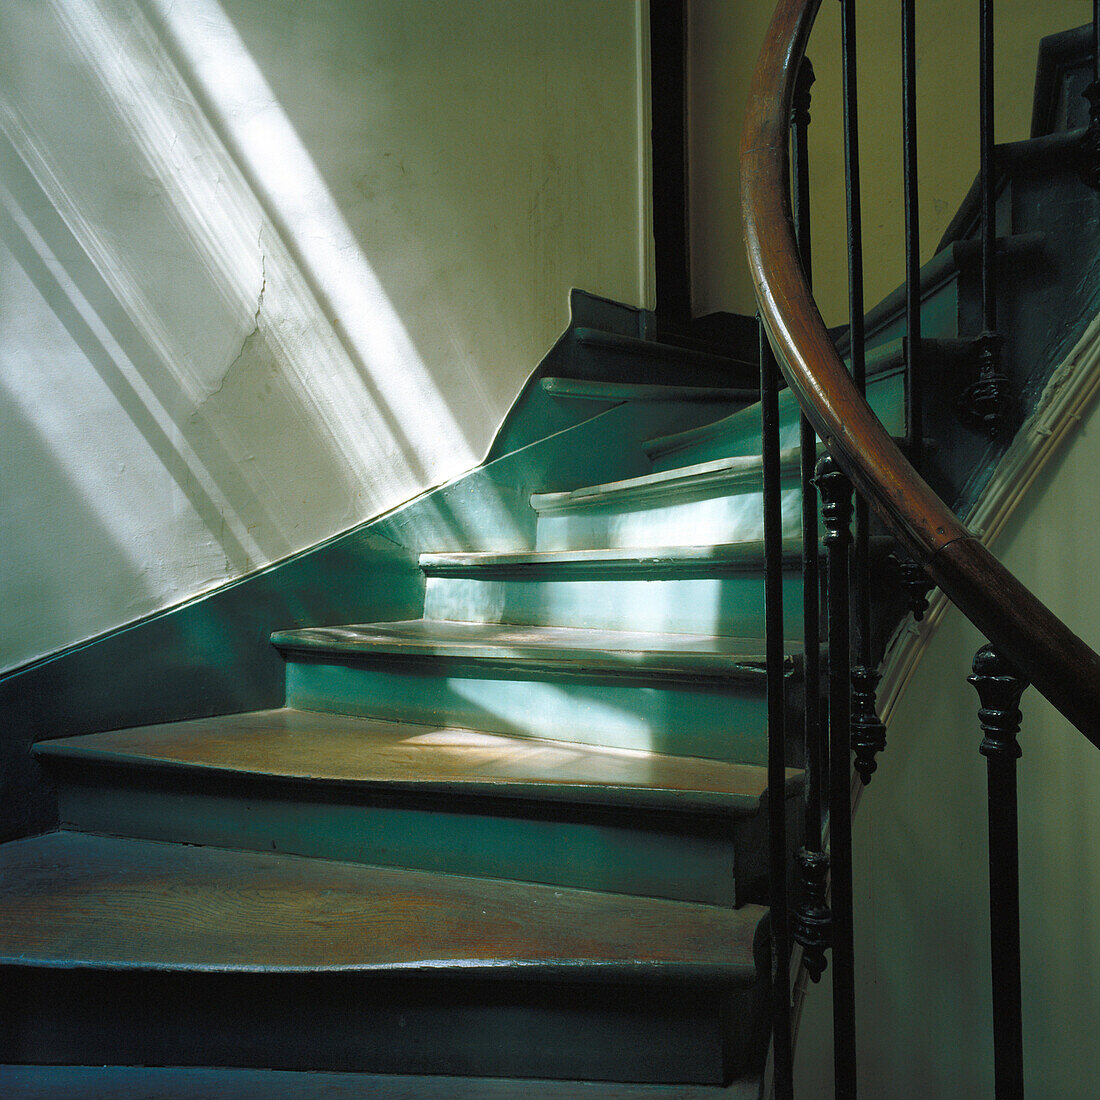 Staircase with light and shadows